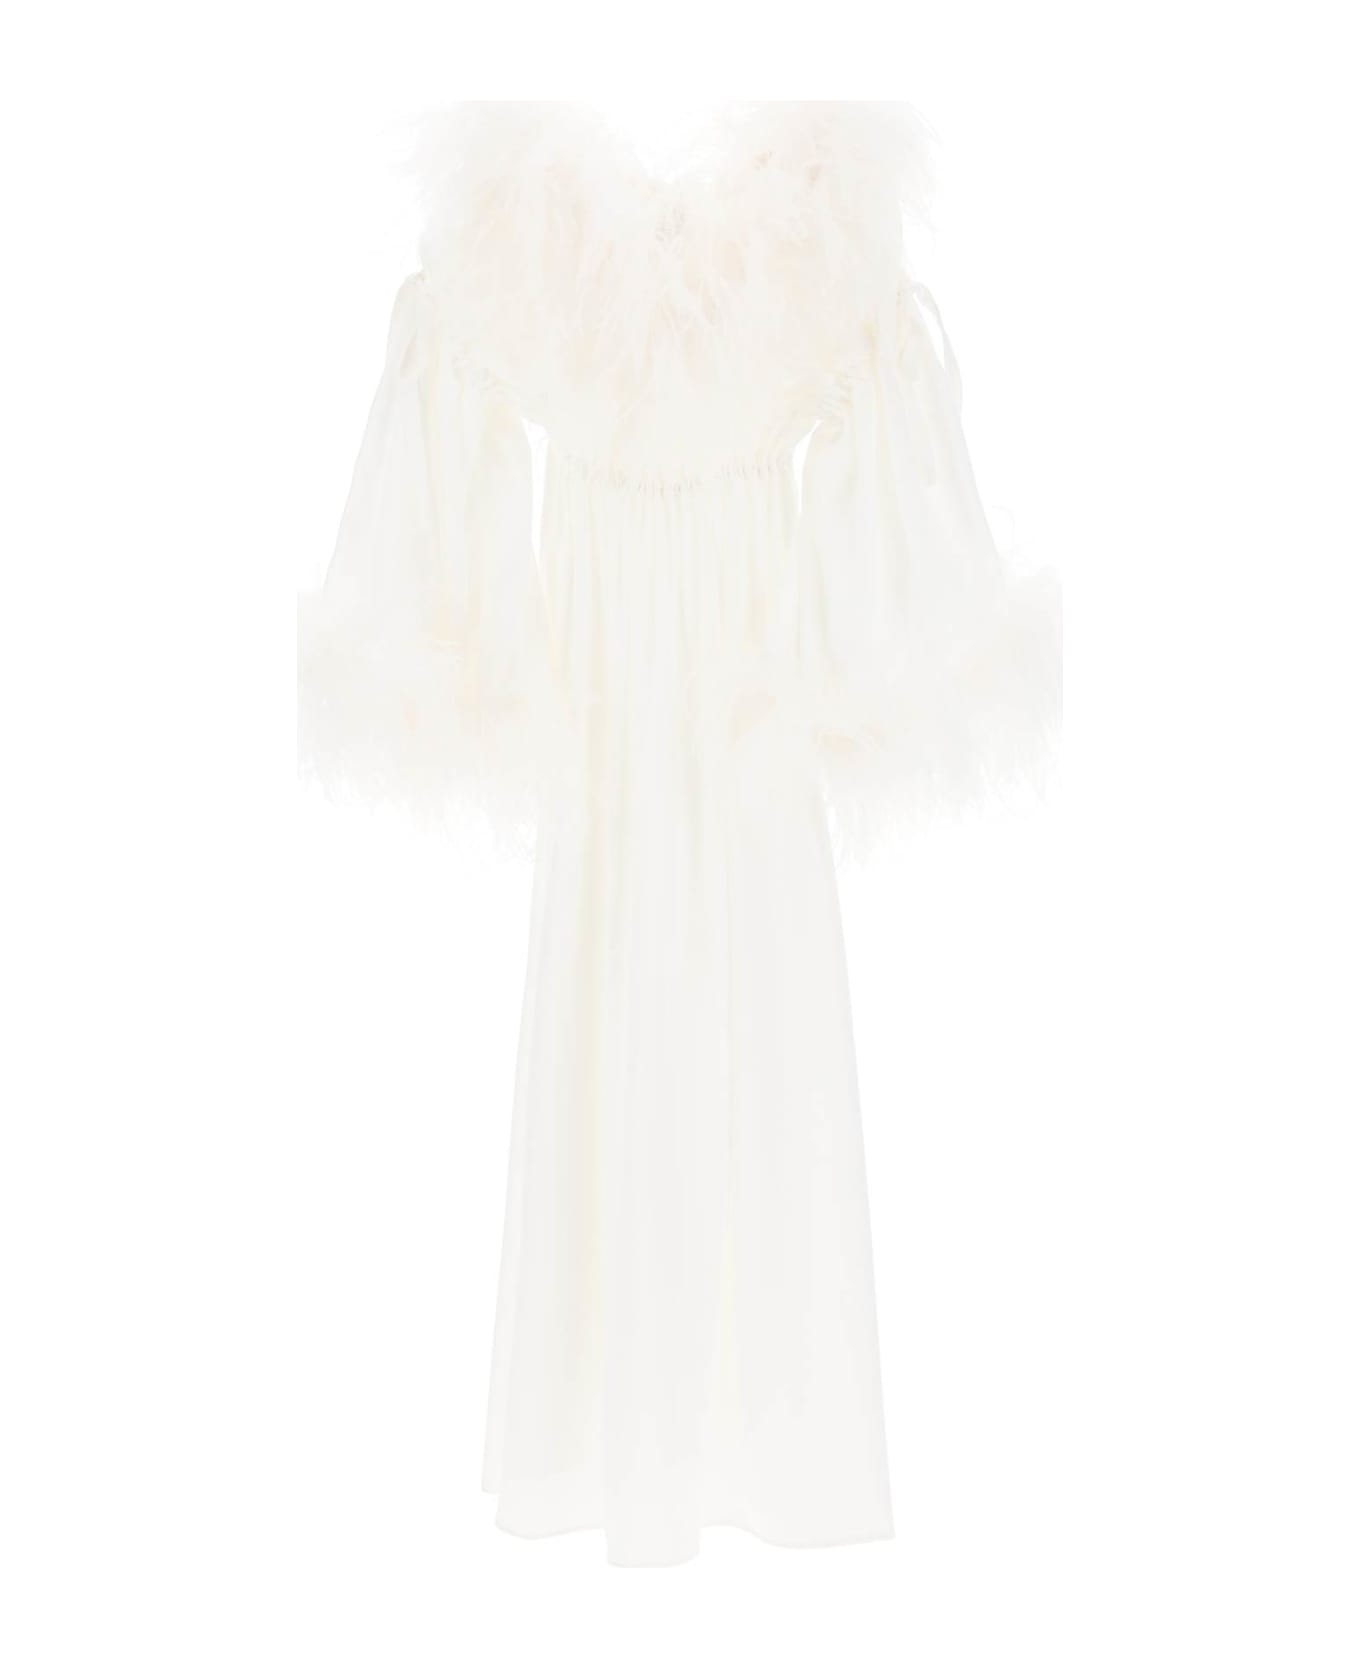 Art Dealer 'bettina' Maxi Dress In Satin With Feathers - WHITE (White)